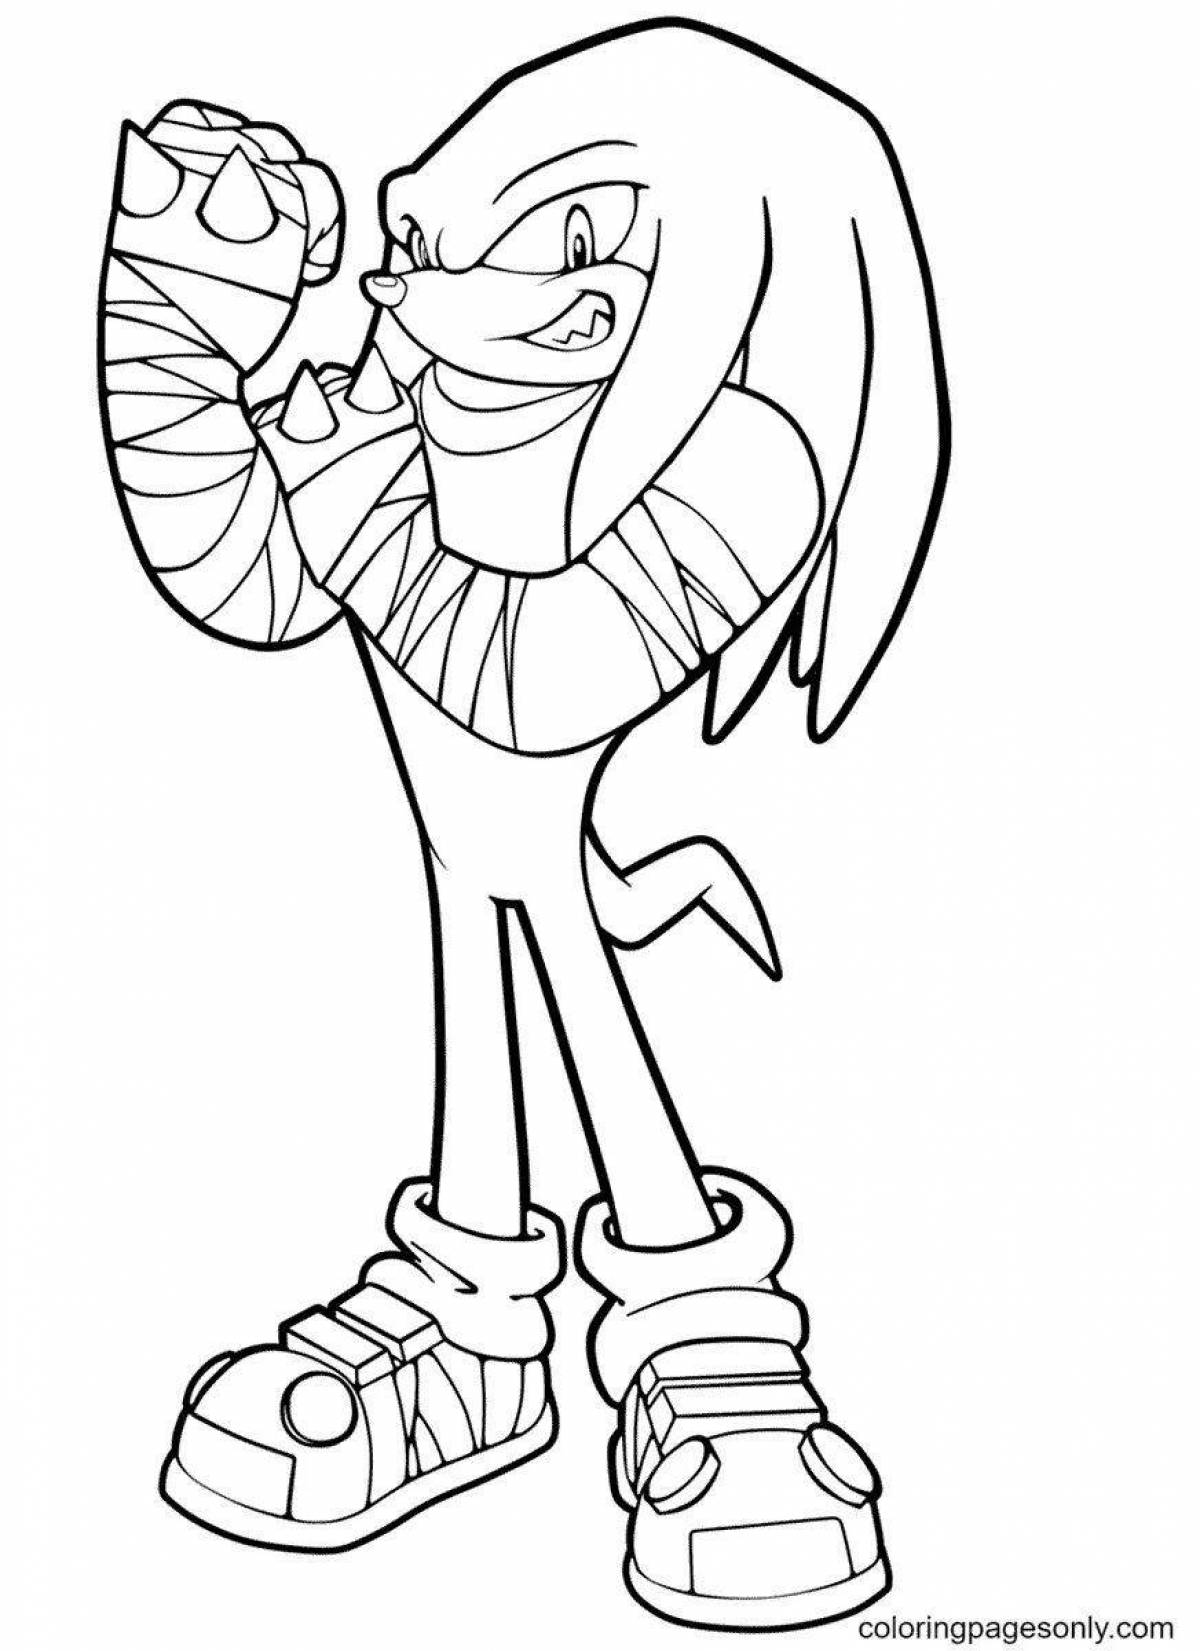 Playful sonic boom coloring book